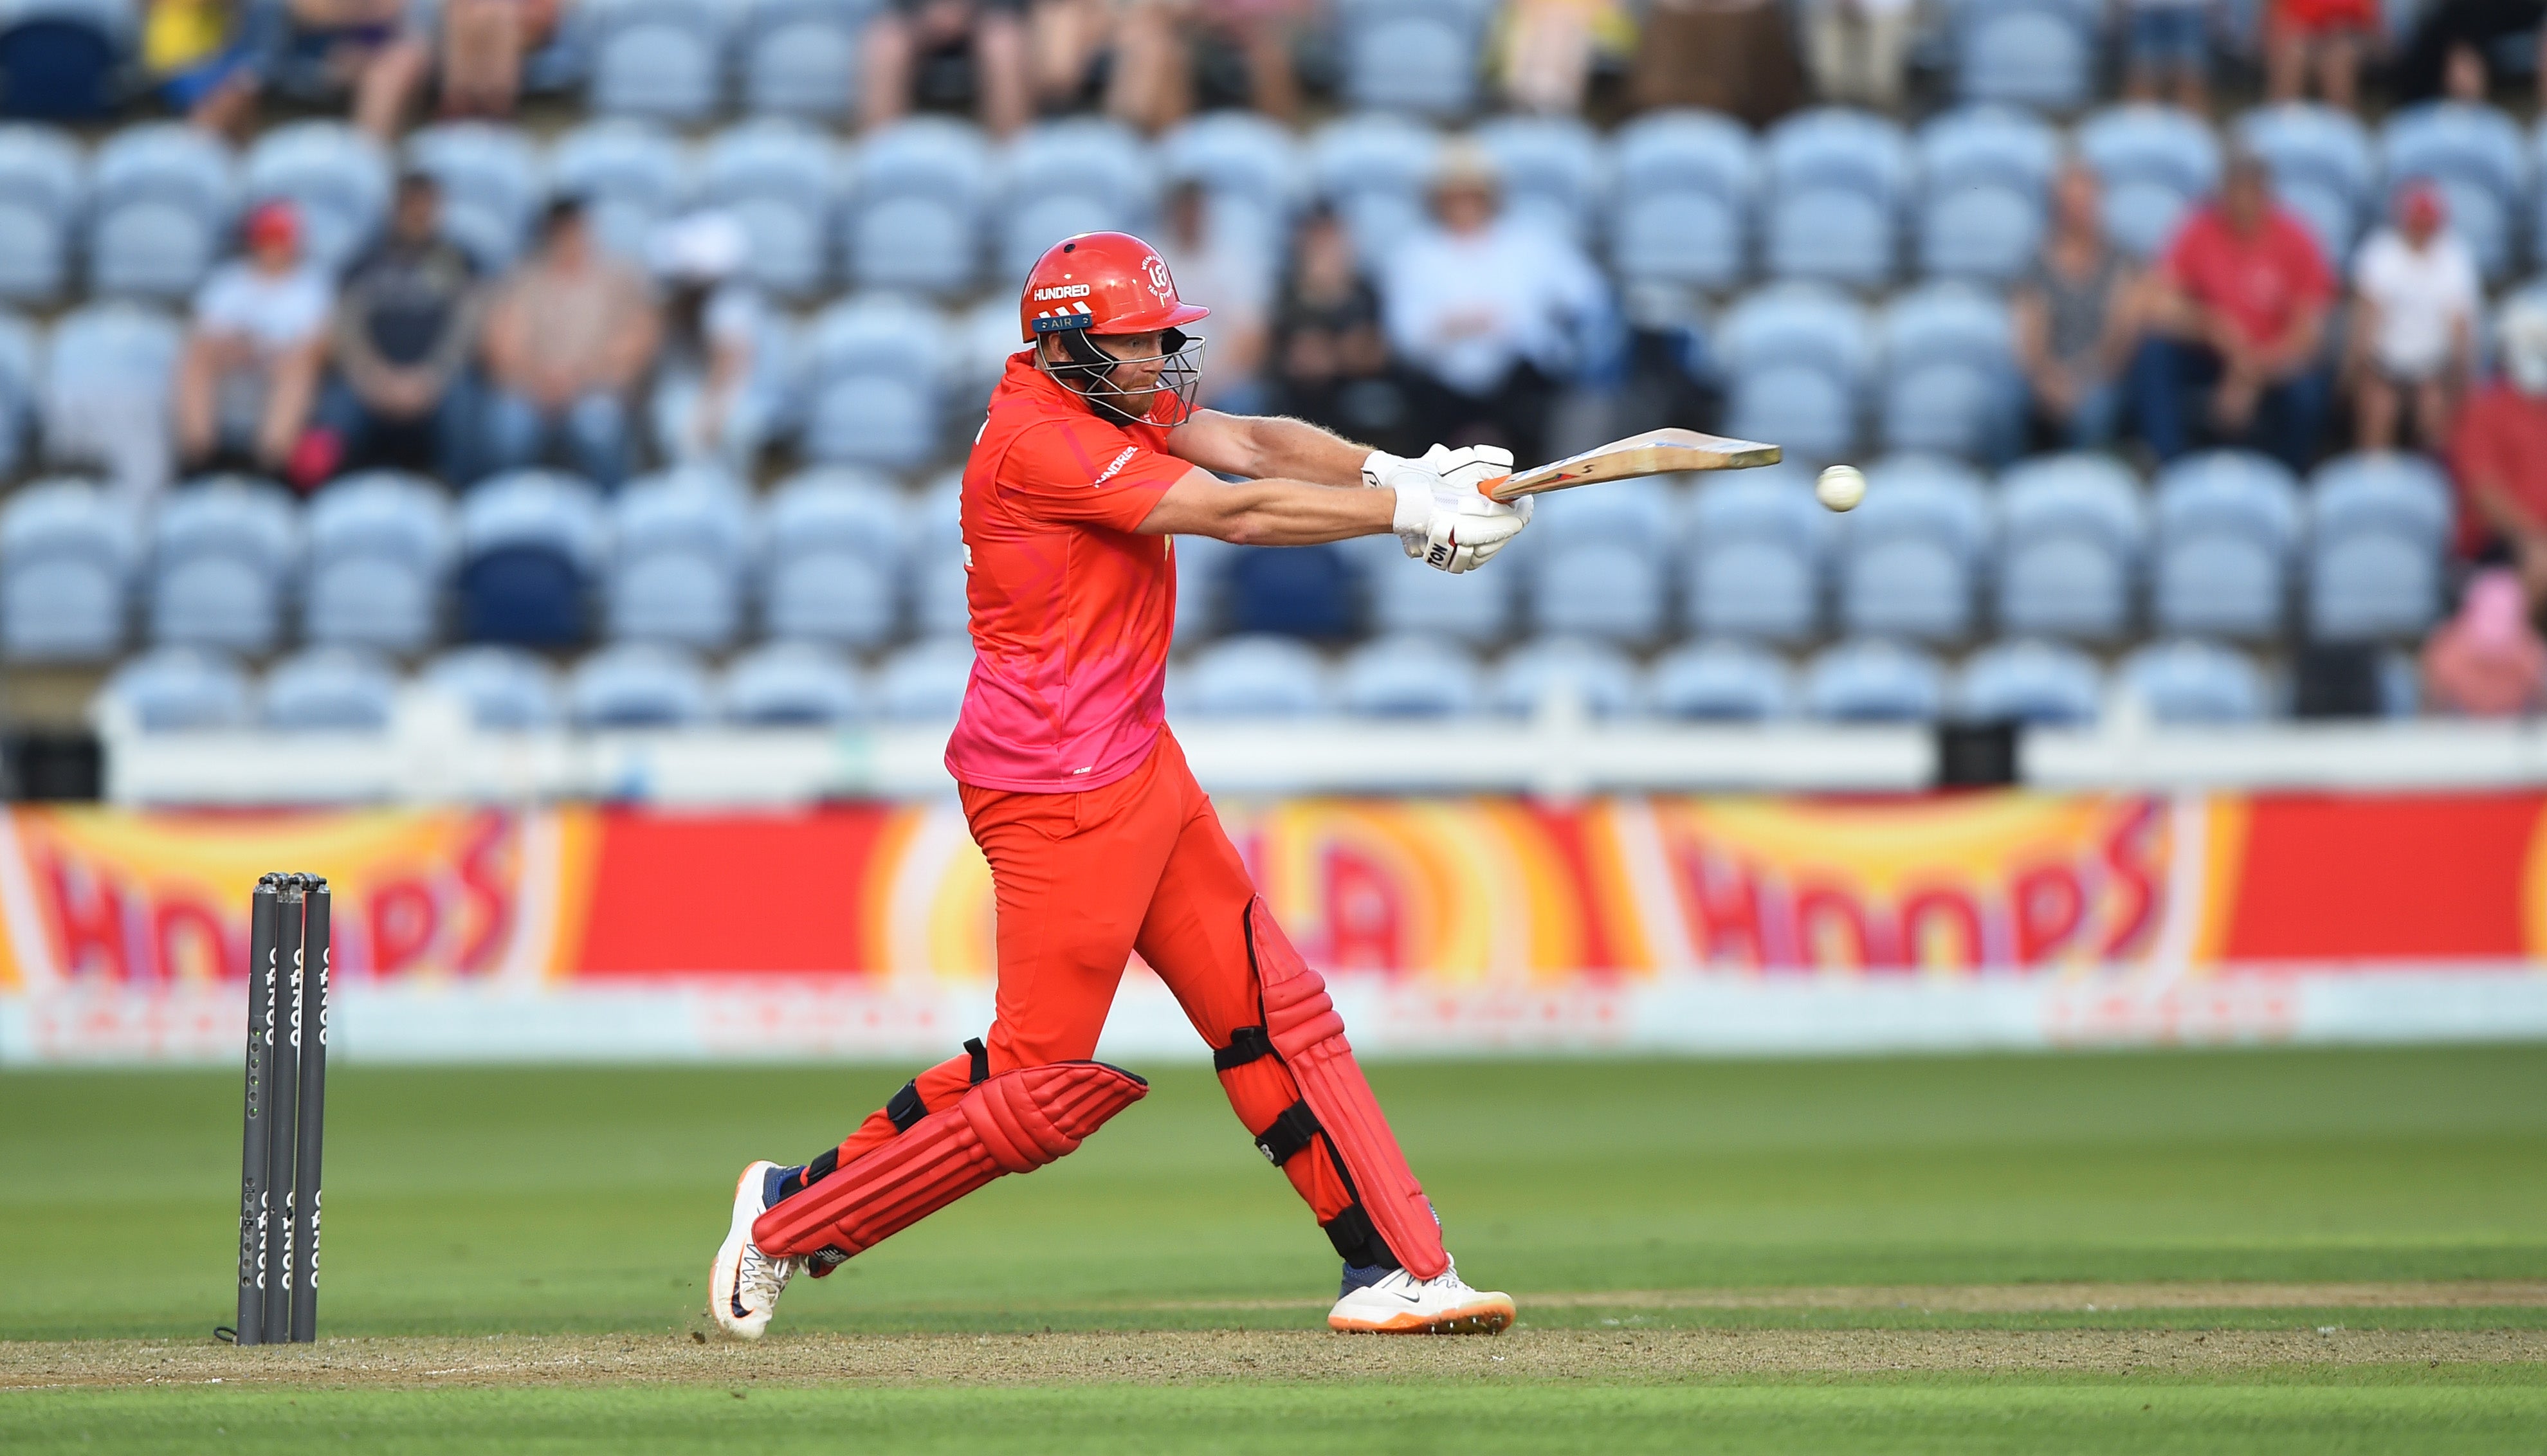 Jonny Bairstow will play for the Welsh Fire at The Hundred